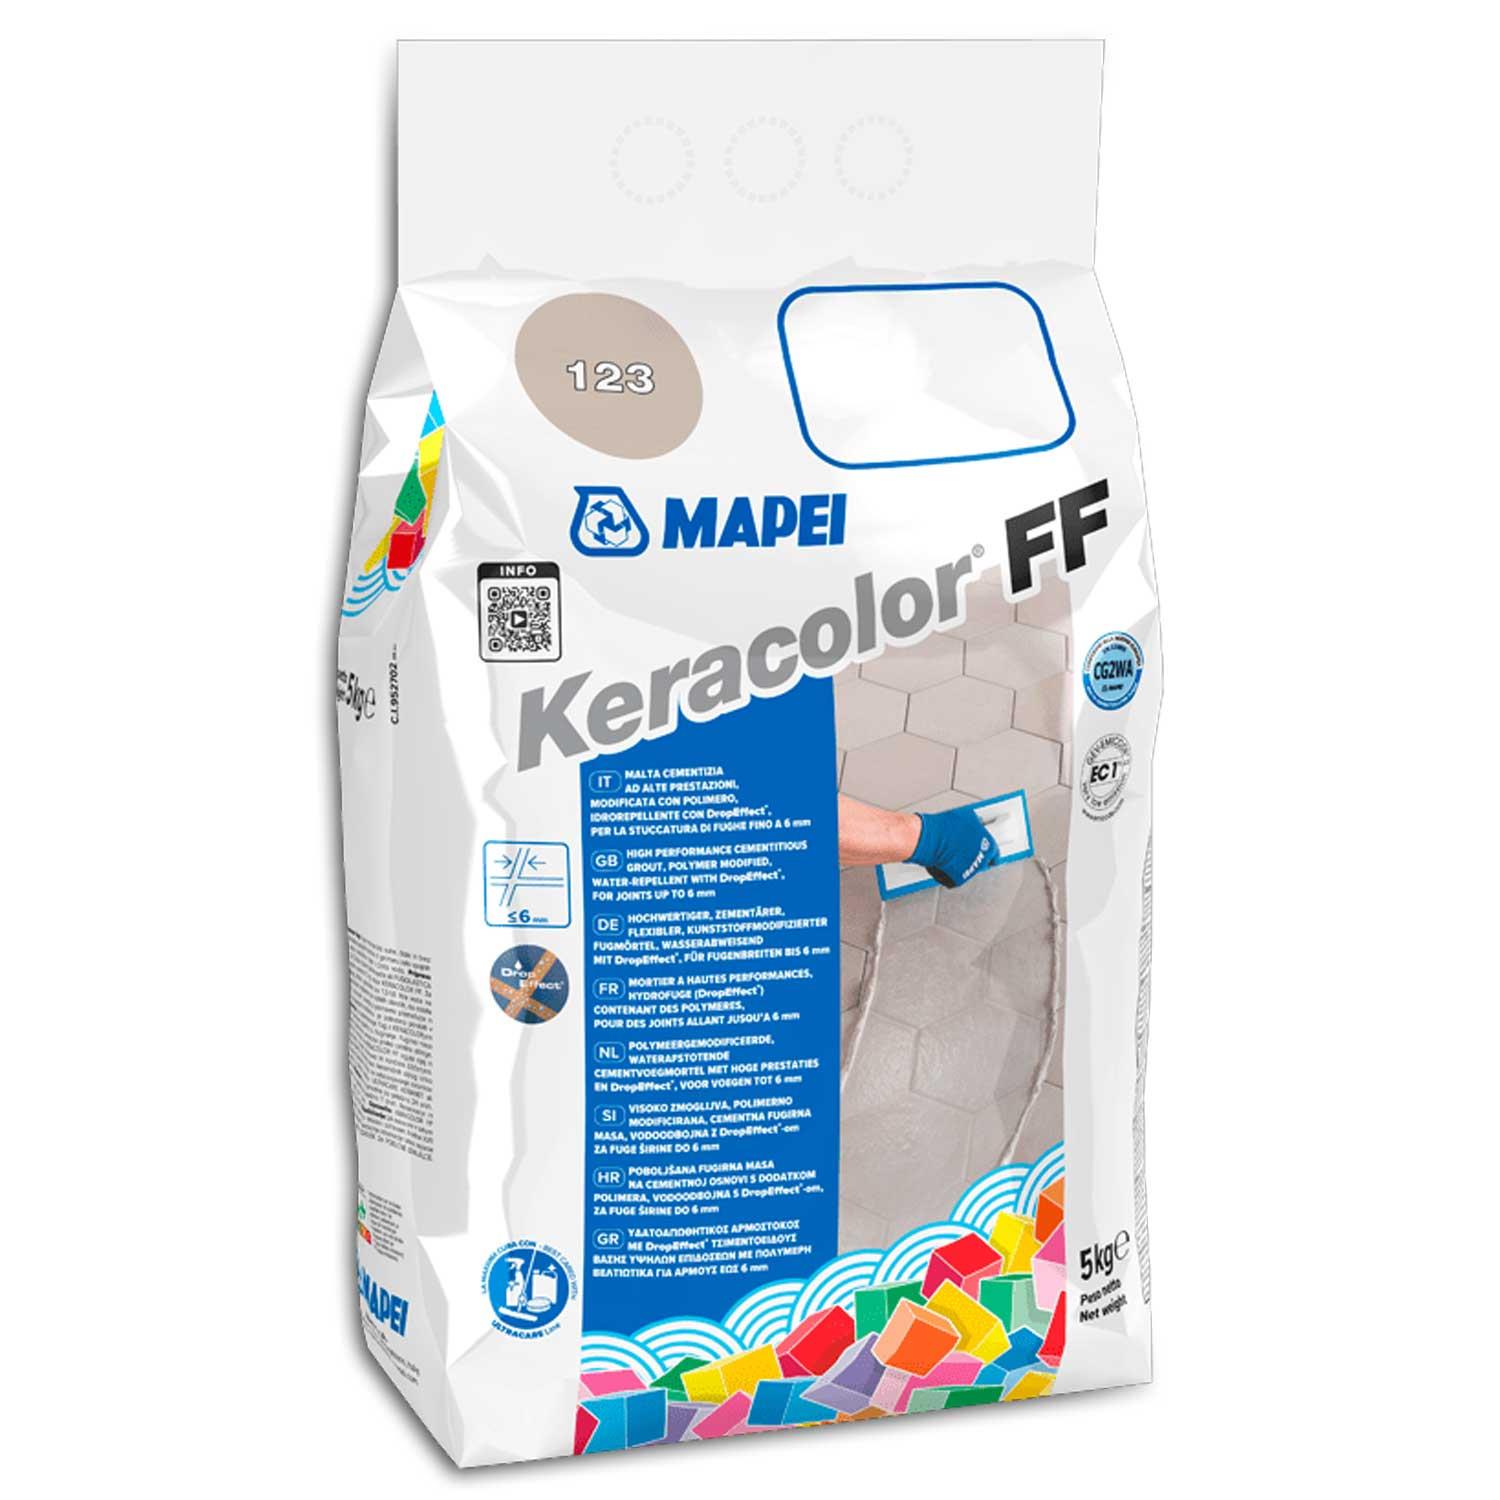 Mapei Keracolor FF Tile Grout Polymer Modified Cement Based 5kg